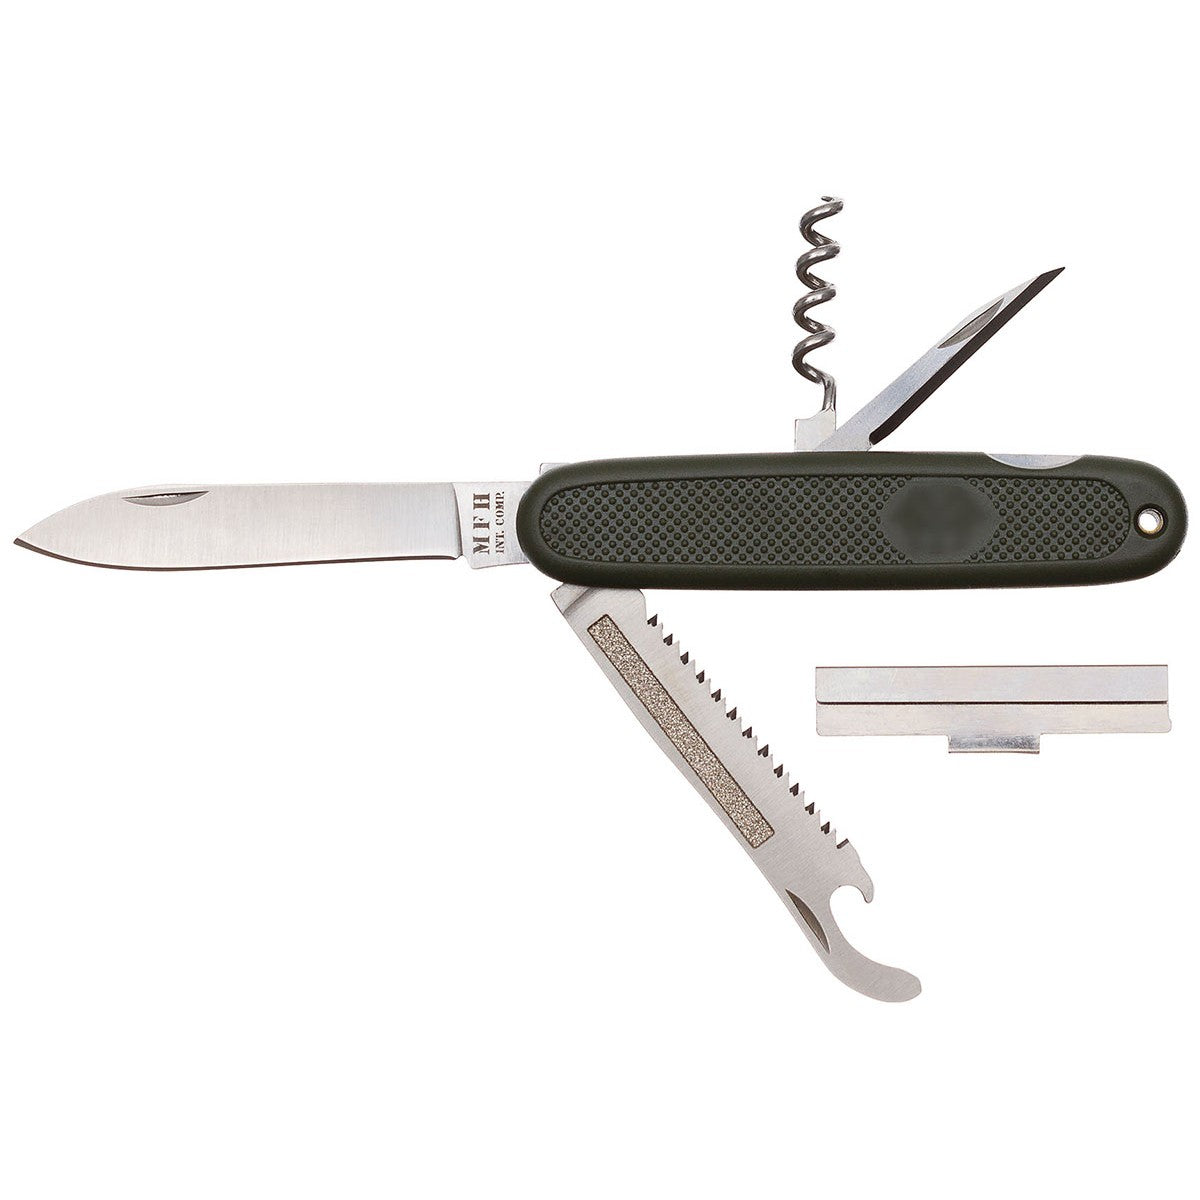 Outdoor folding knife with saw and file